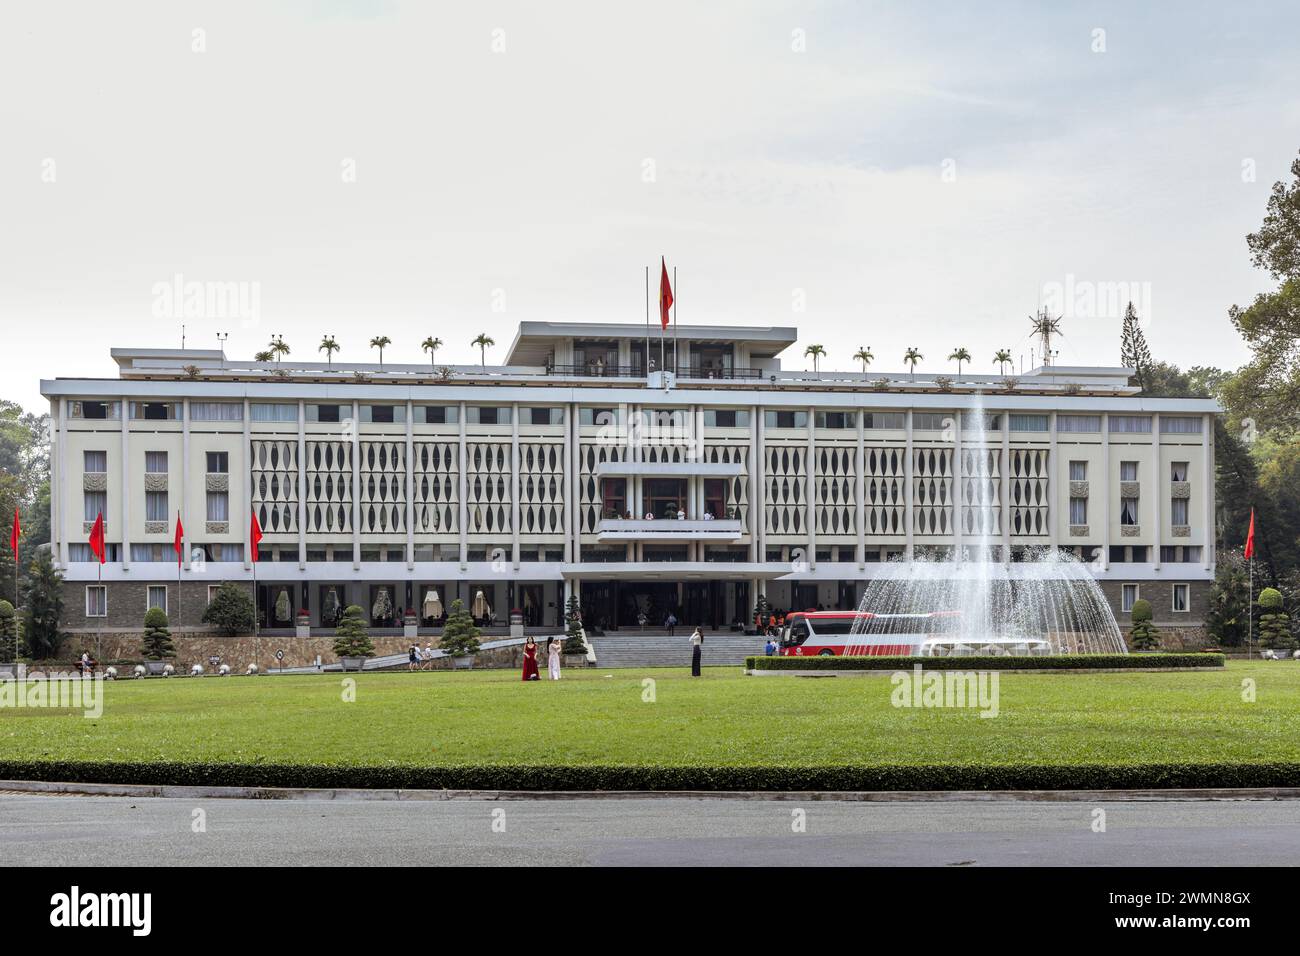 The historical Independence Palace is a landmark in Ho Chi Minh City, Vietnam. Stock Photo